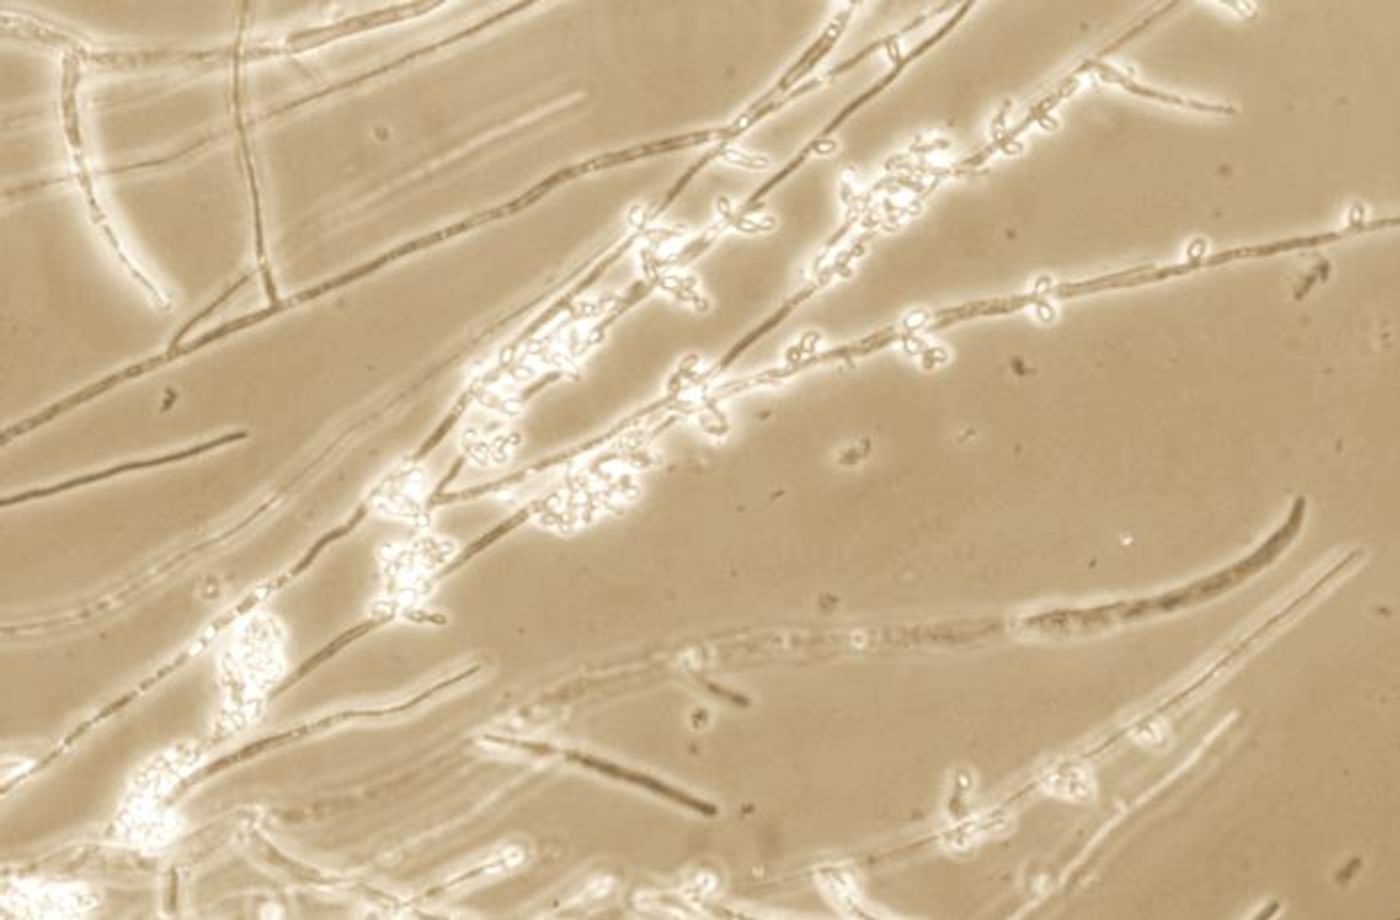 Candida albicans with hyphae / Credit: CDC/ Dr. Hardin